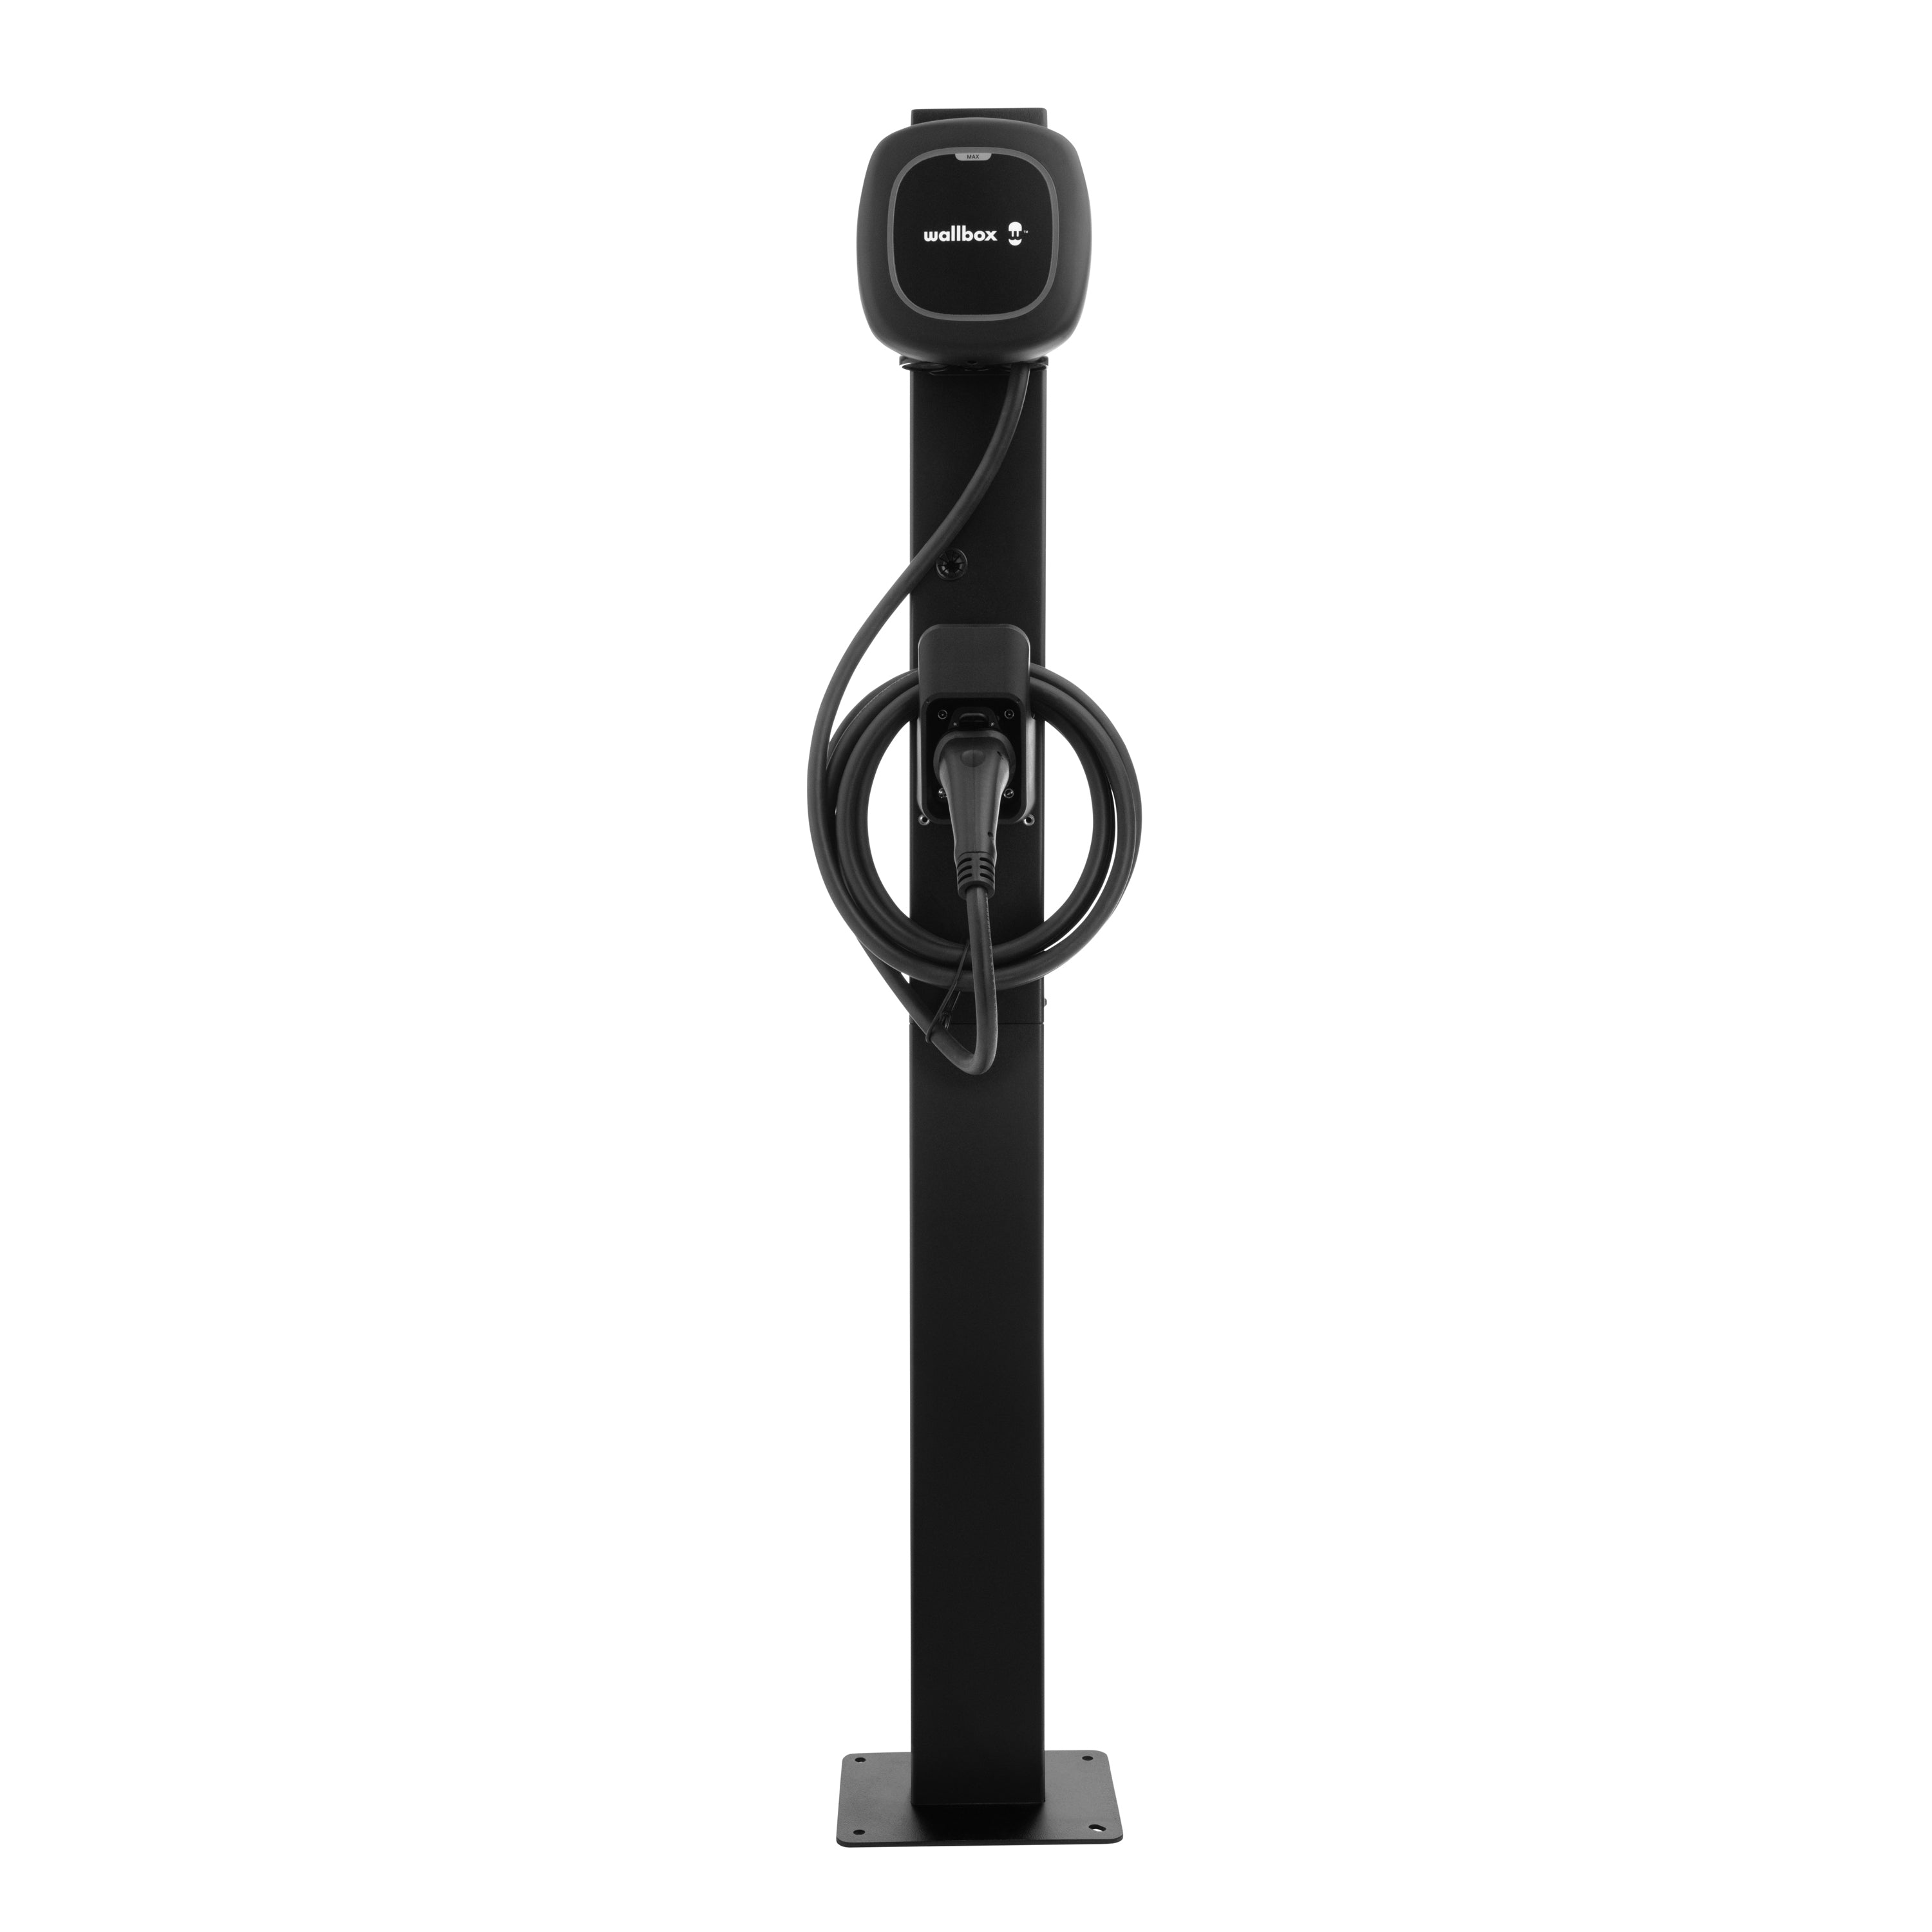 Stand / Mounting Post for Wallbox Pulsar Plus/Max